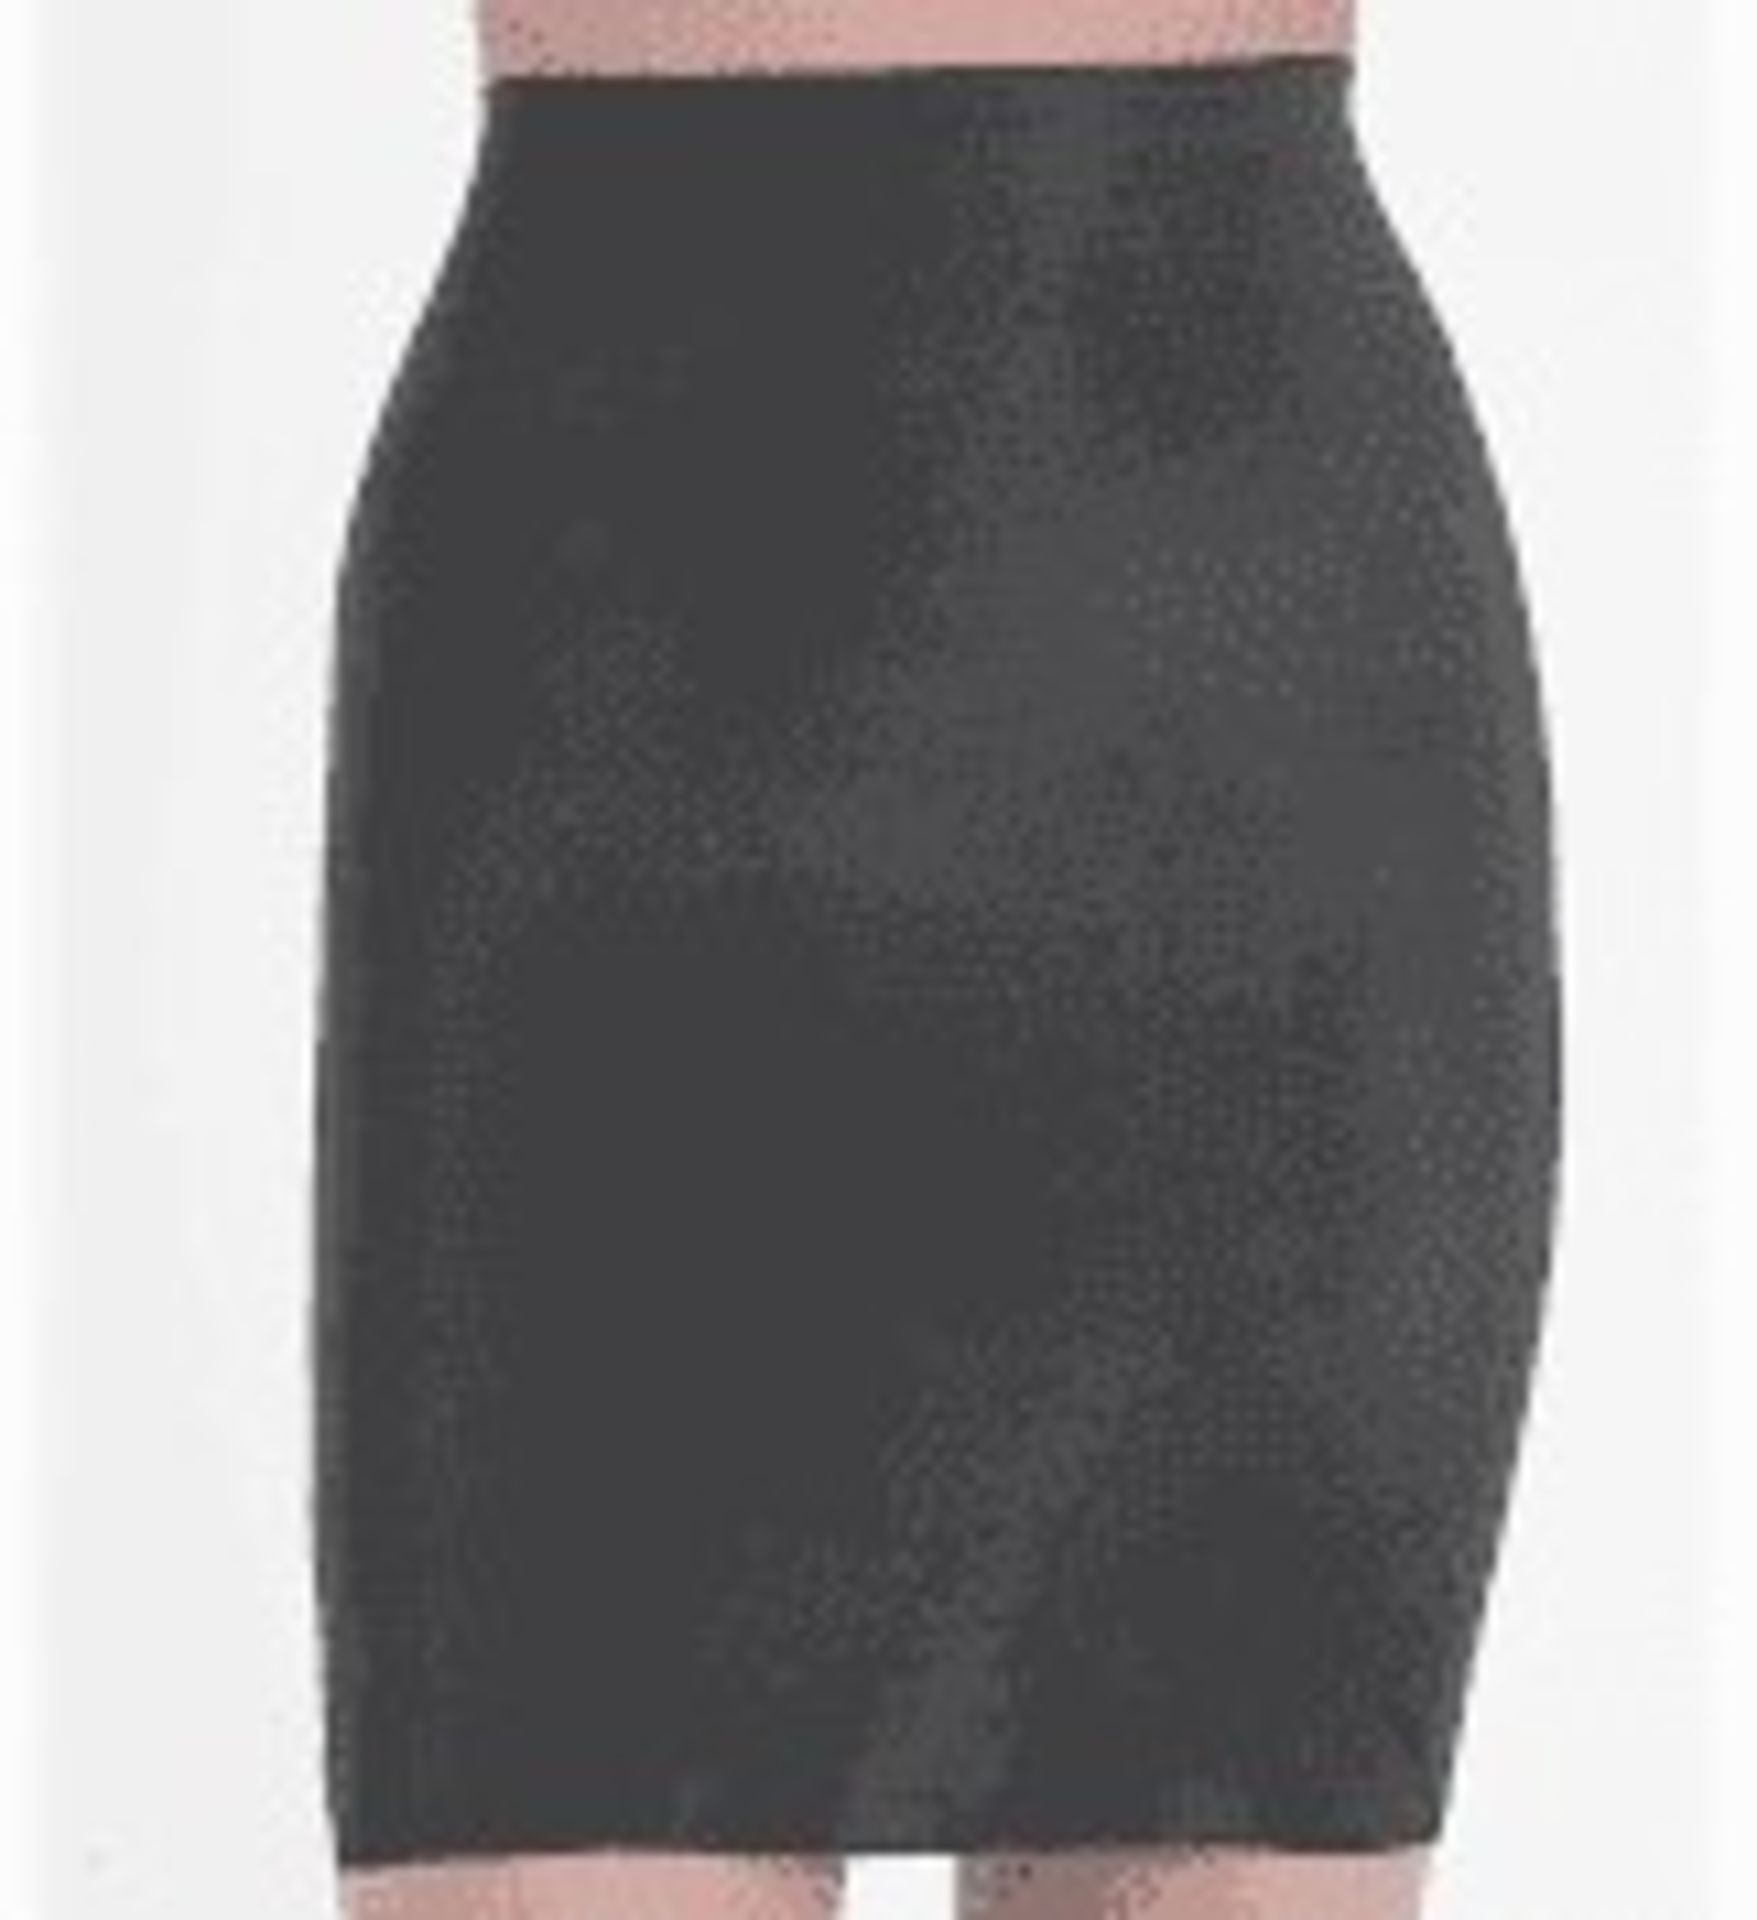 1 LOT TO CONTAIN 6 SPANX SKIRTS IN BOLD BLACK / SIZE 6 / STYLE 1899 / RRP £528.00 (PUBLIC VIEWING - Image 2 of 2